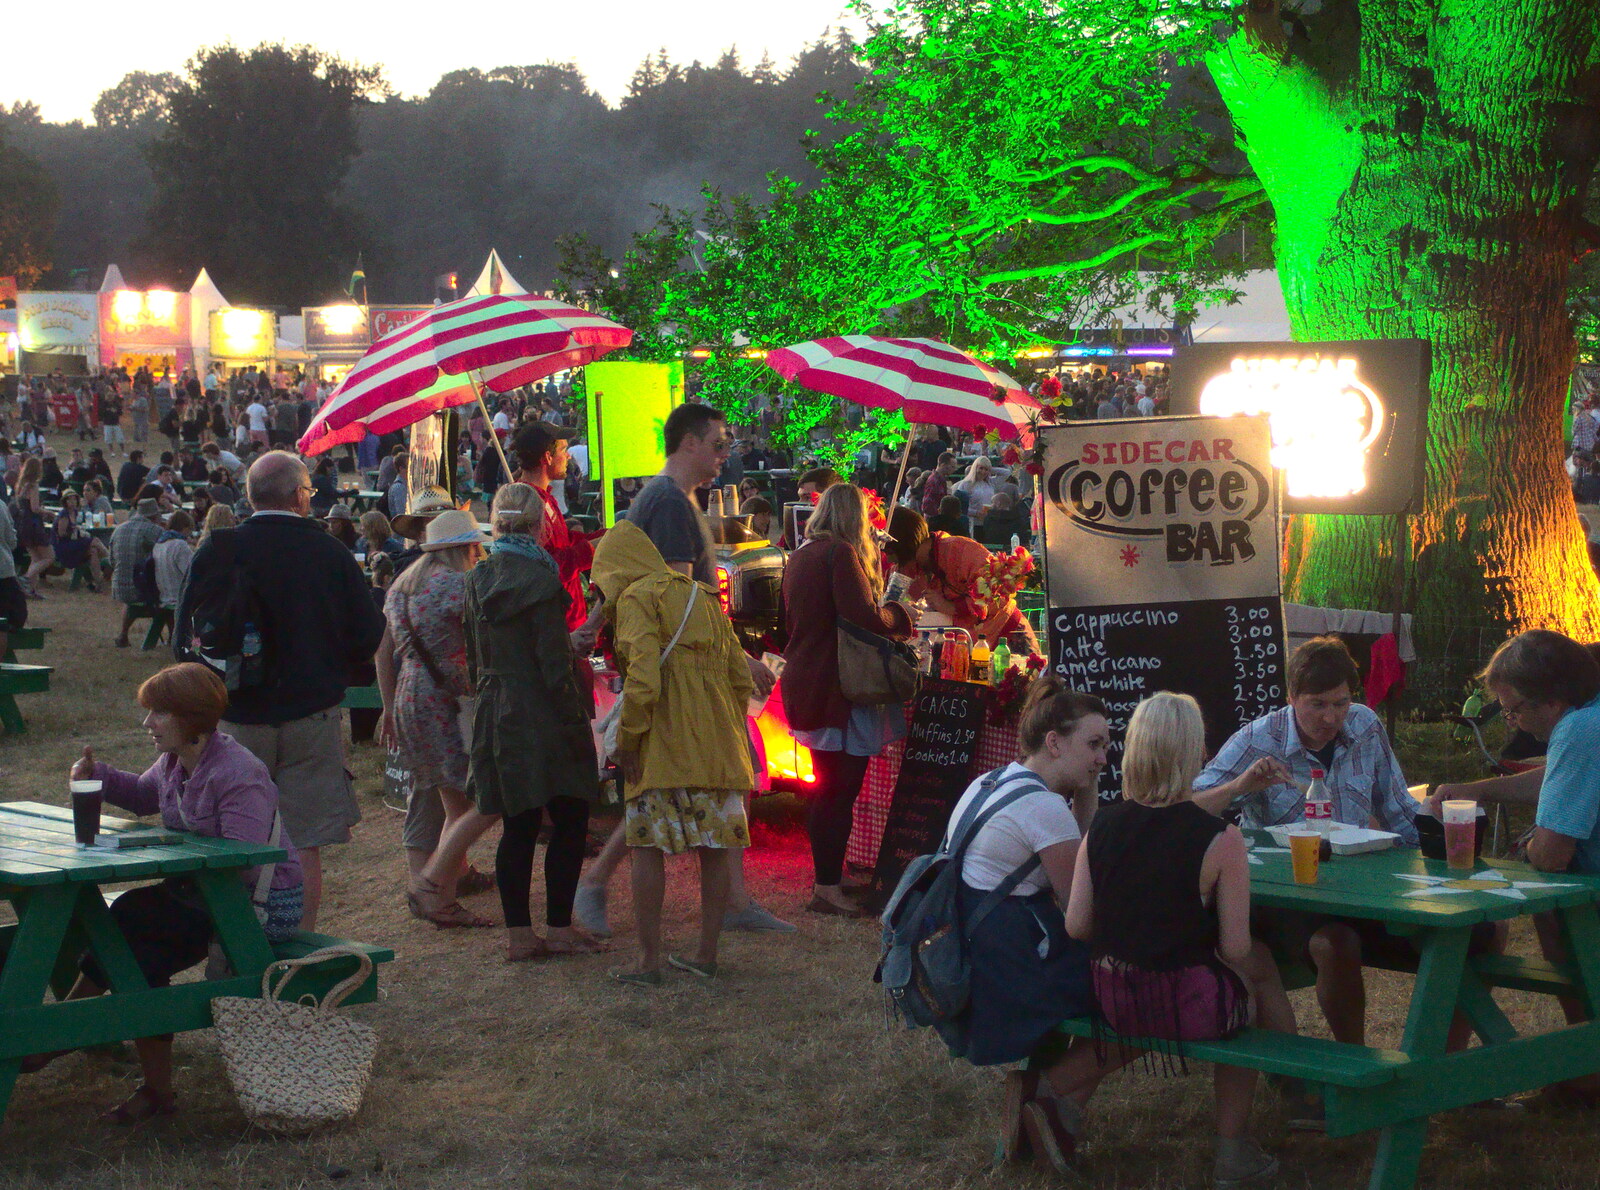 Coffee bar and a bright green tree from The 8th Latitude Festival, Henham Park, Southwold, Suffolk - 18th July 2013